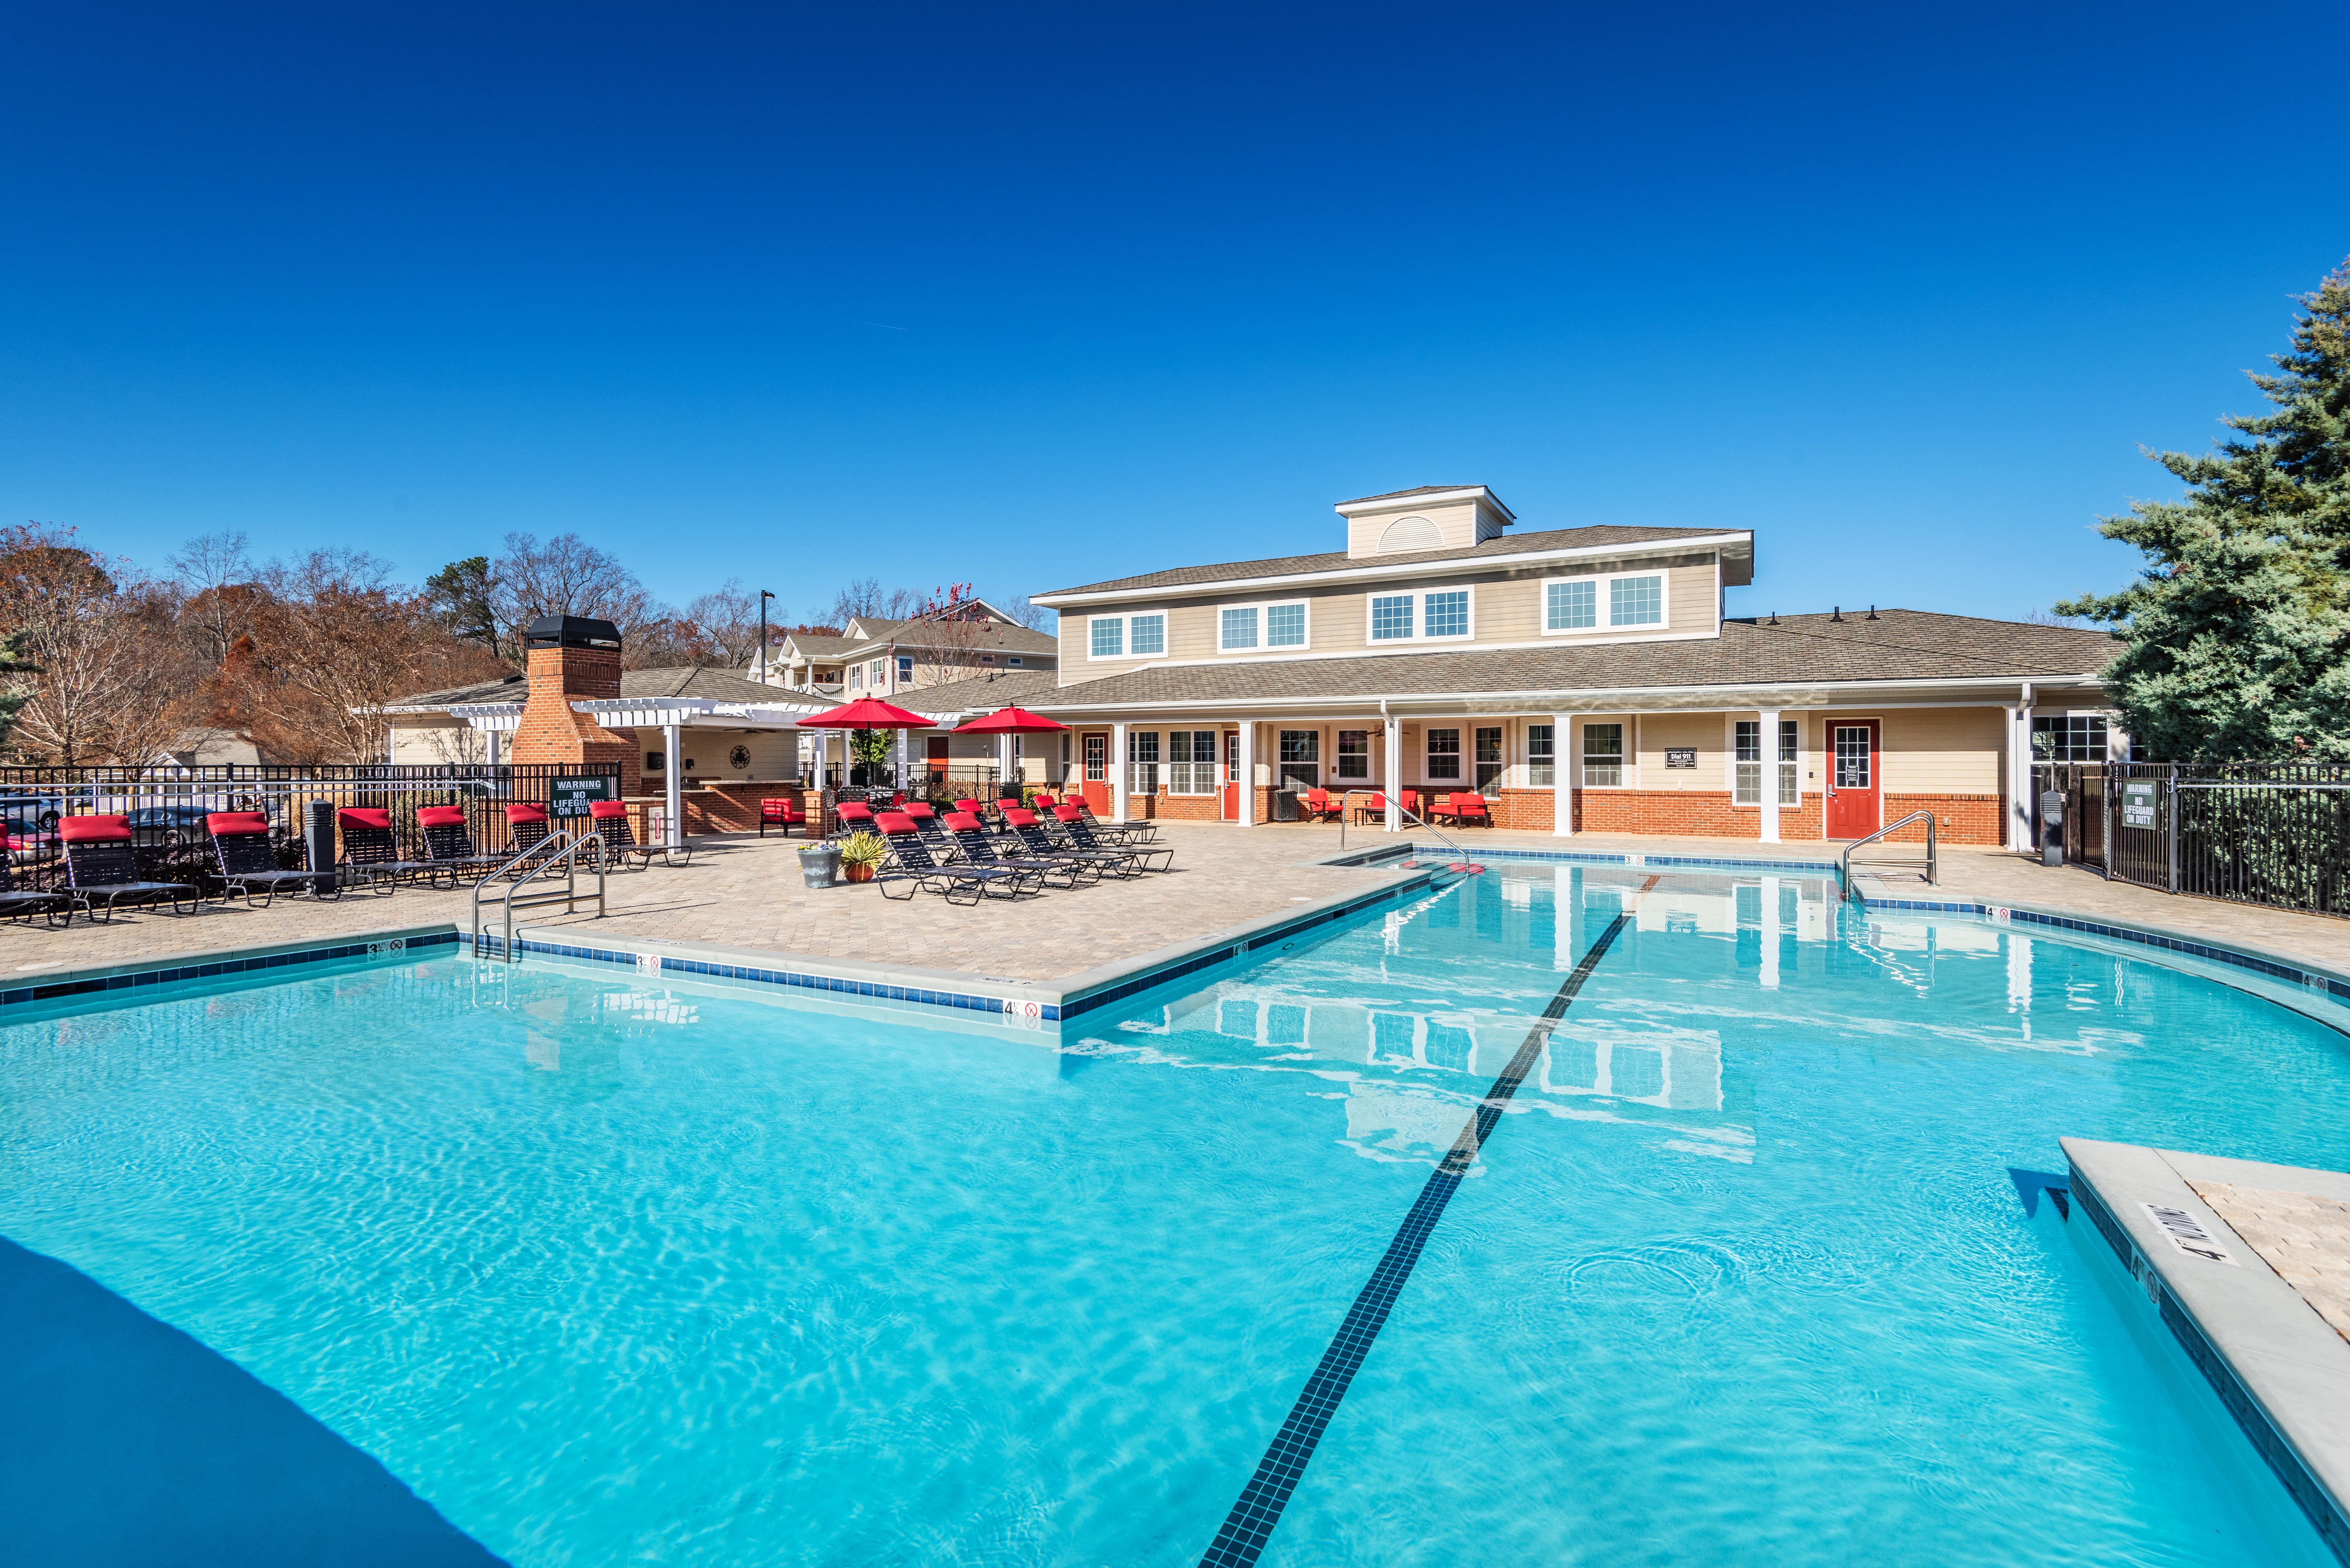 The sparkling community swimming pool at Village at Broadstone Station in Apex, North Carolina